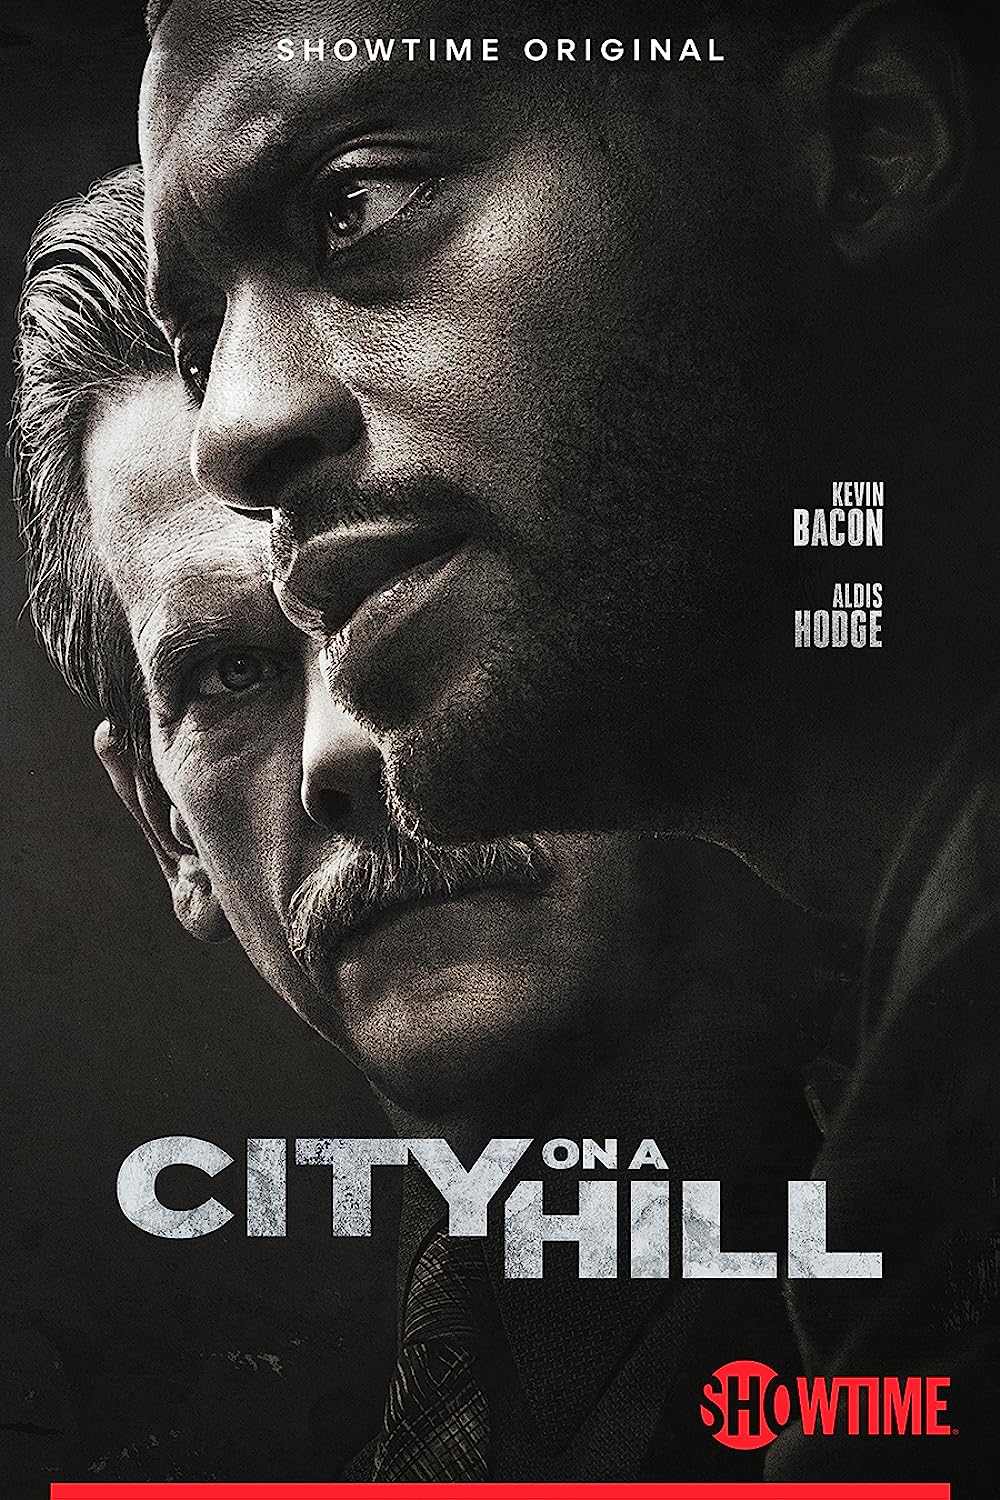 City on a Hill poster